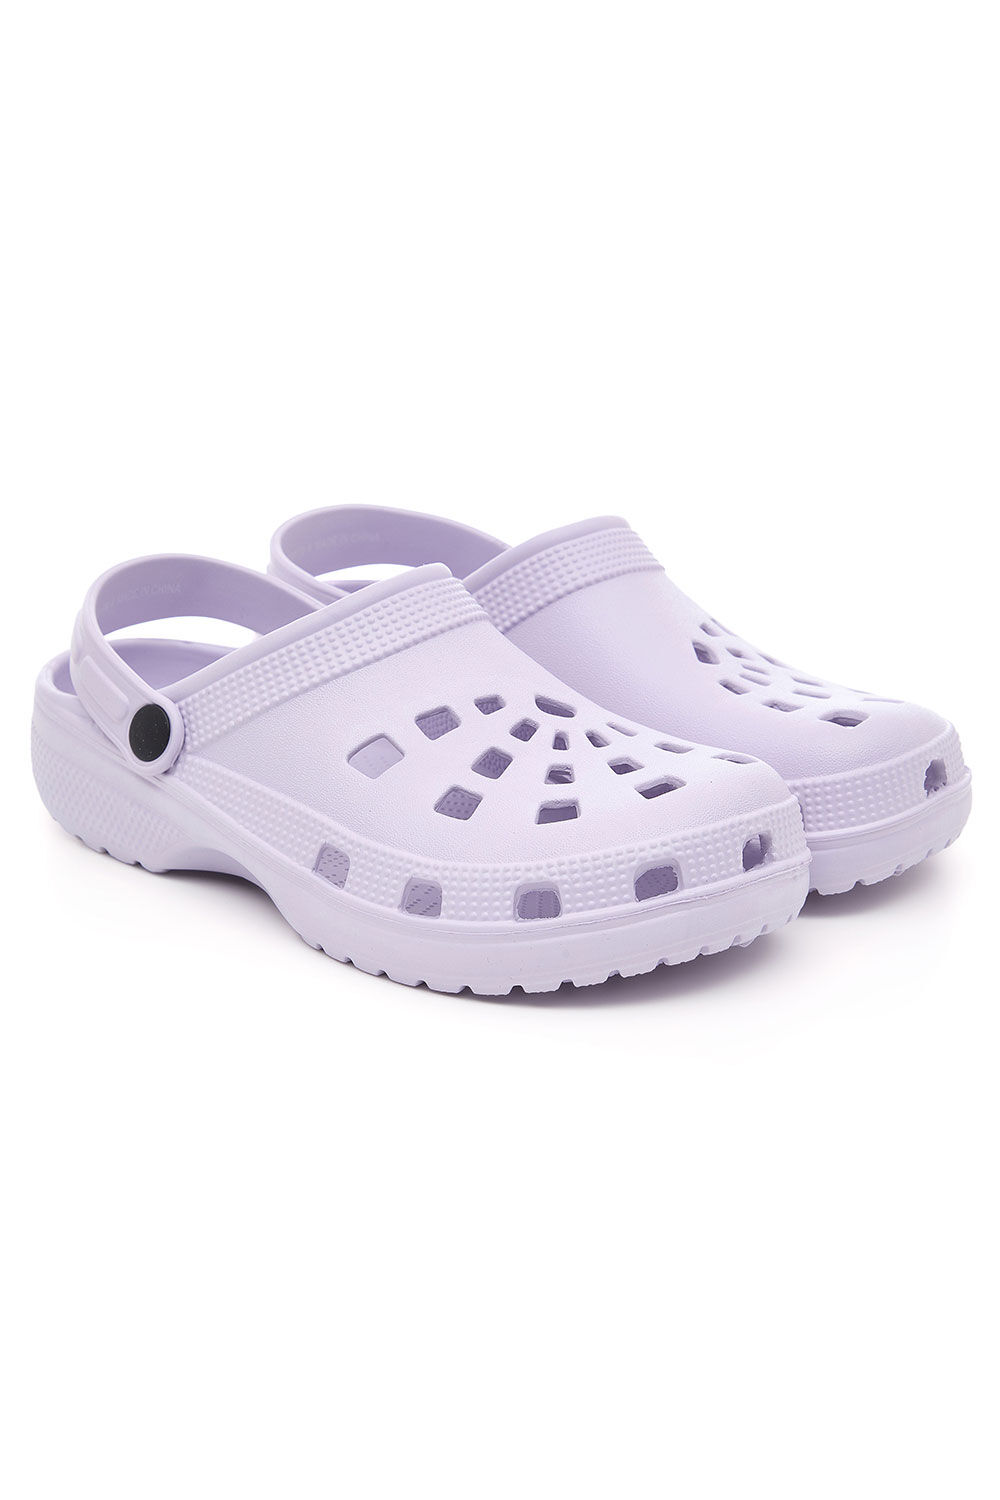 Bonmarche Lilac Slip On Clogs With Ankle Strap, Size: 5